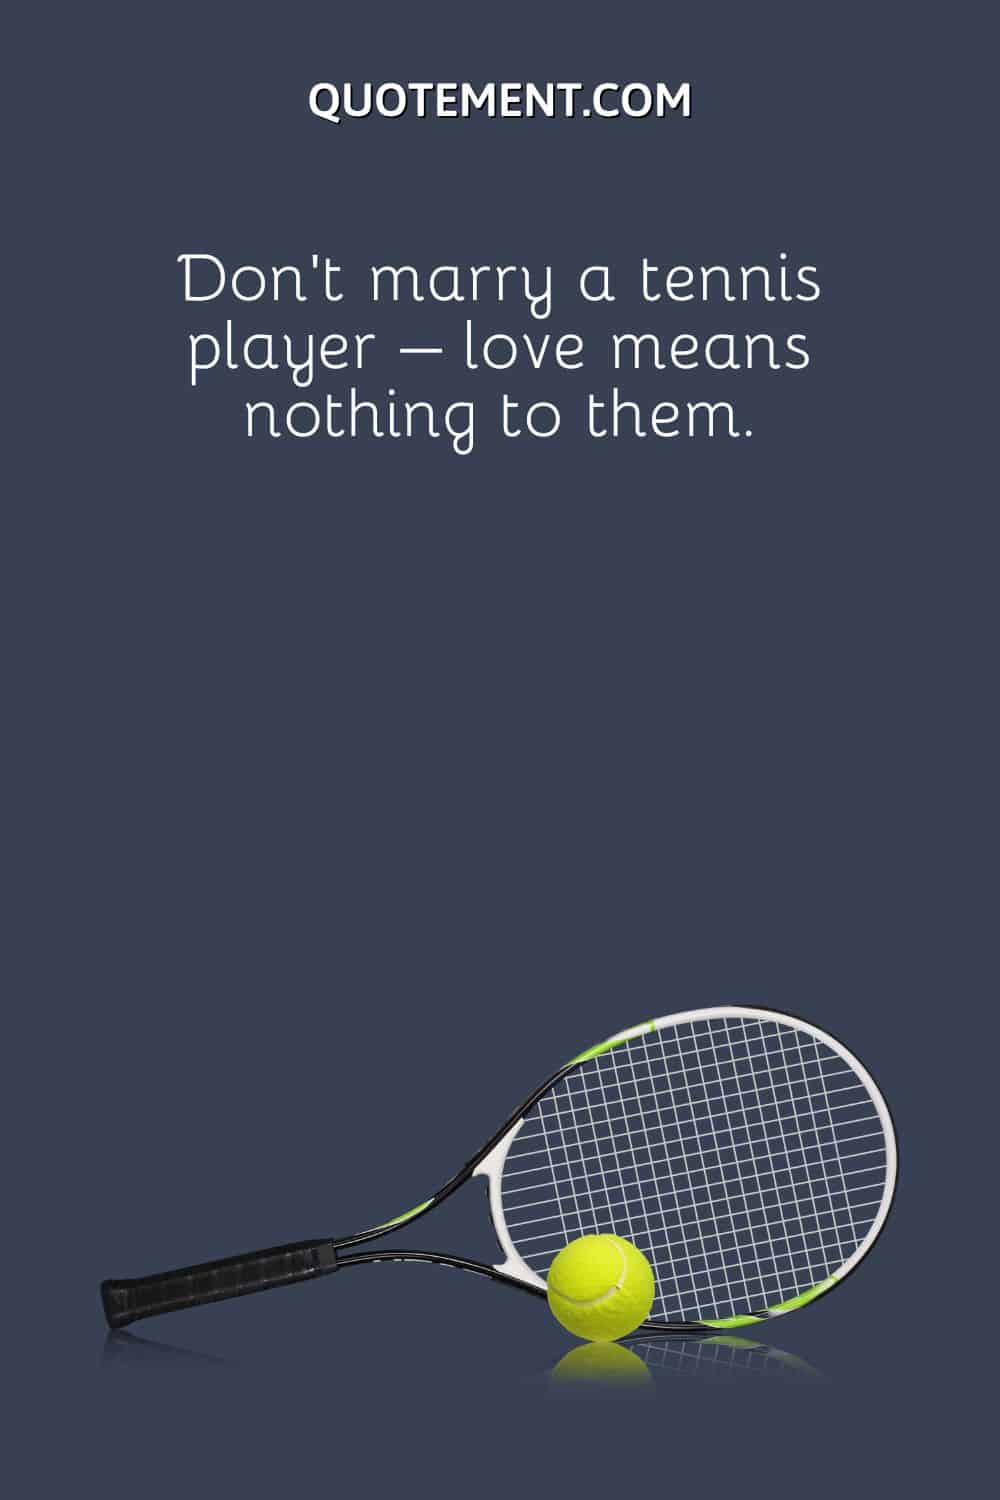 Don’t marry a tennis player – love means nothing to them.